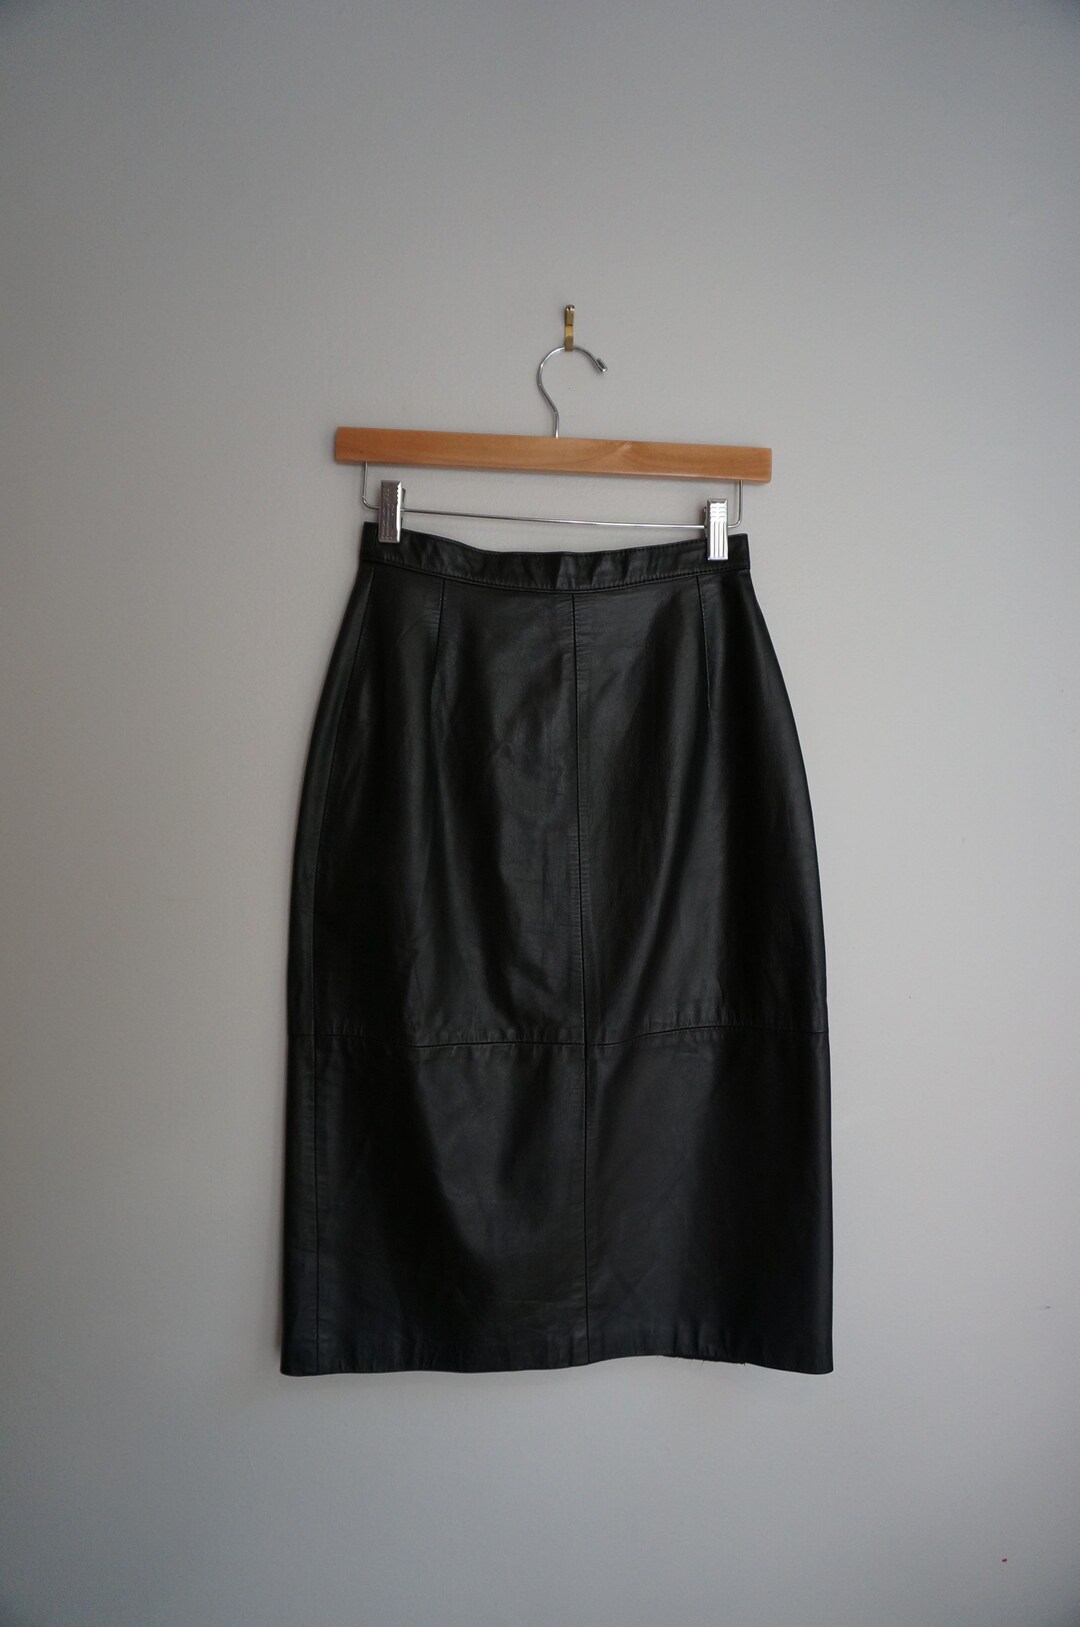 Vintage 80s High Waisted Black Leather Skirt Made in Argentina - Etsy